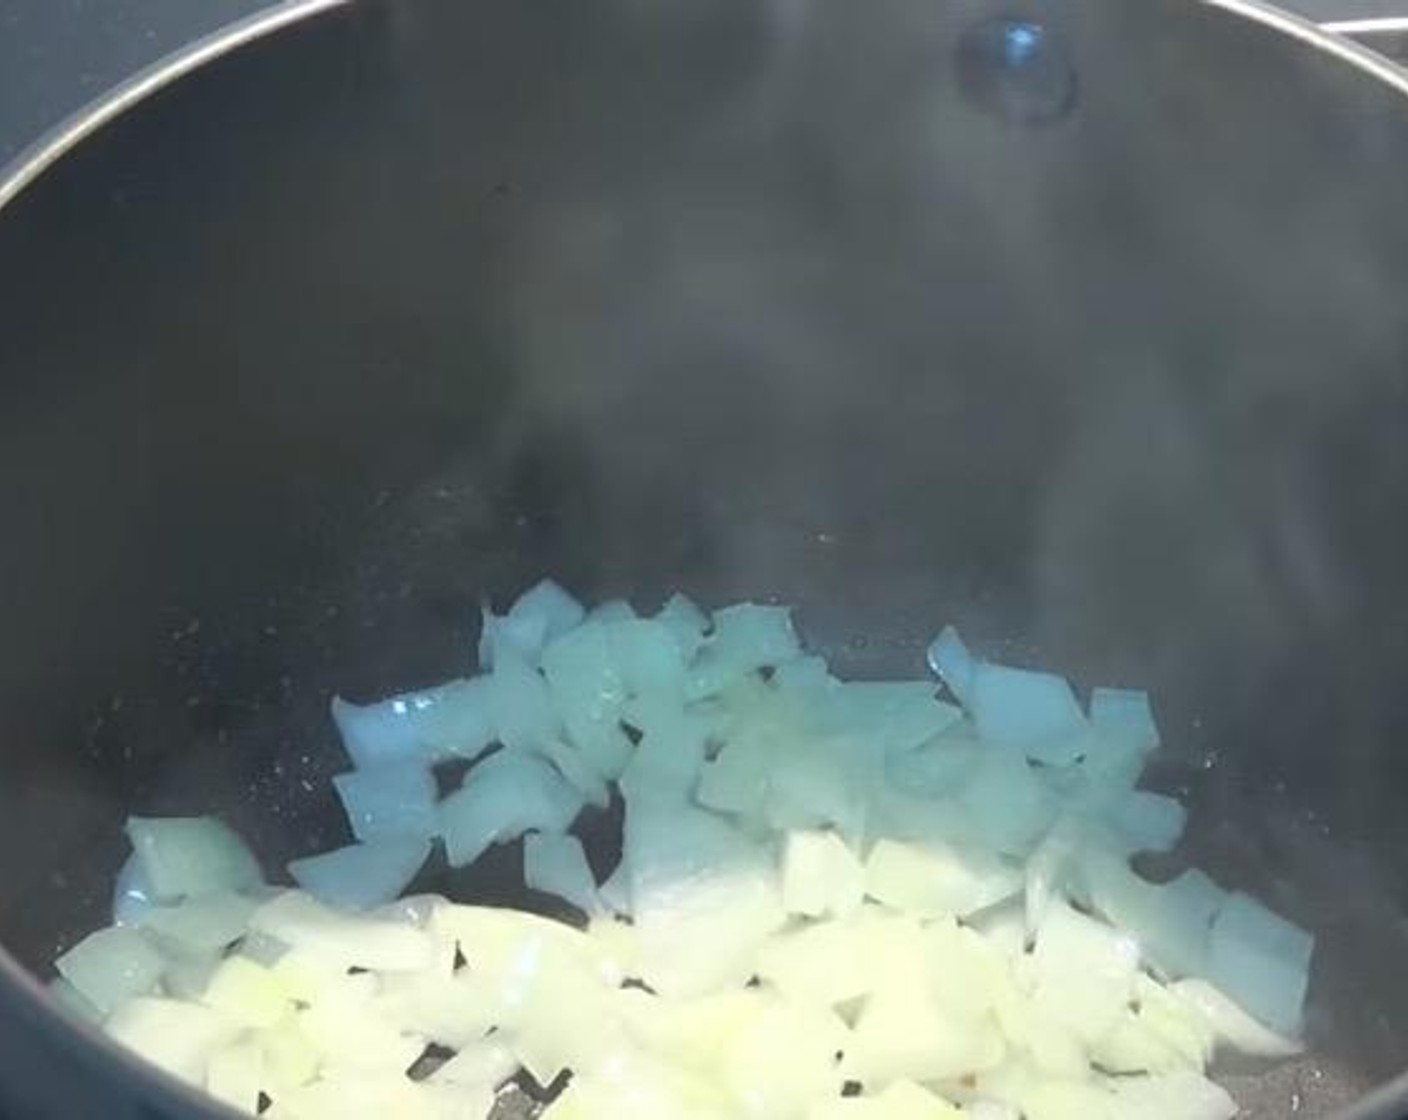 step 1 In a large saucepan over medium heat, add Oil (1 Tbsp). Cook Yellow Onion (1) for 2-3 minutes, until soft and translucent.